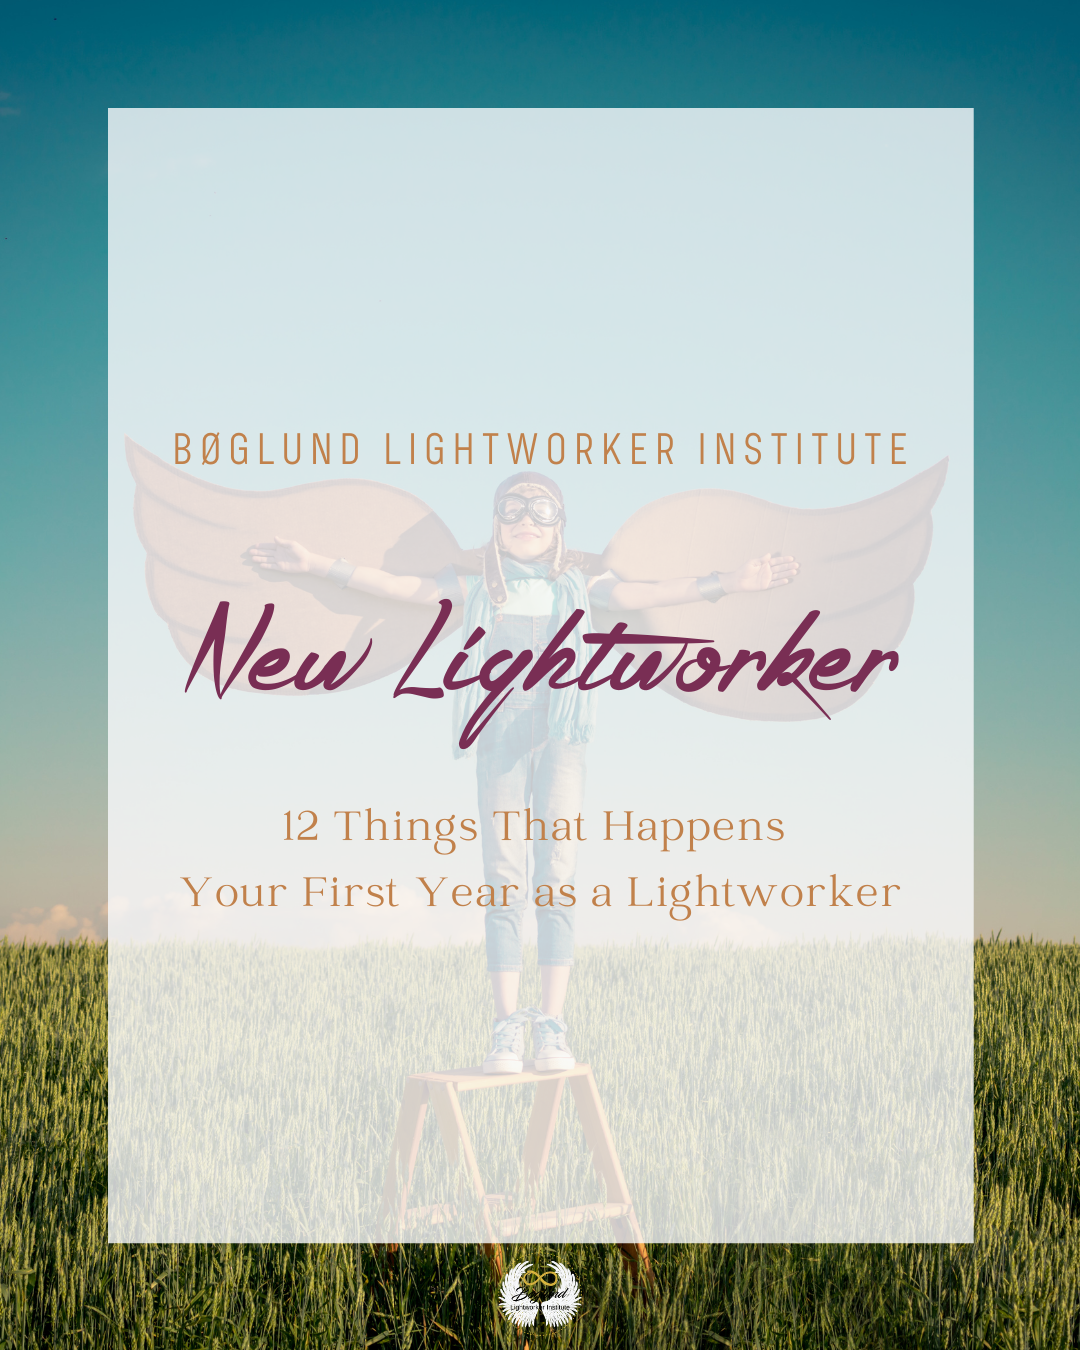 12 Things That Happens Your First Year as a Lightworker